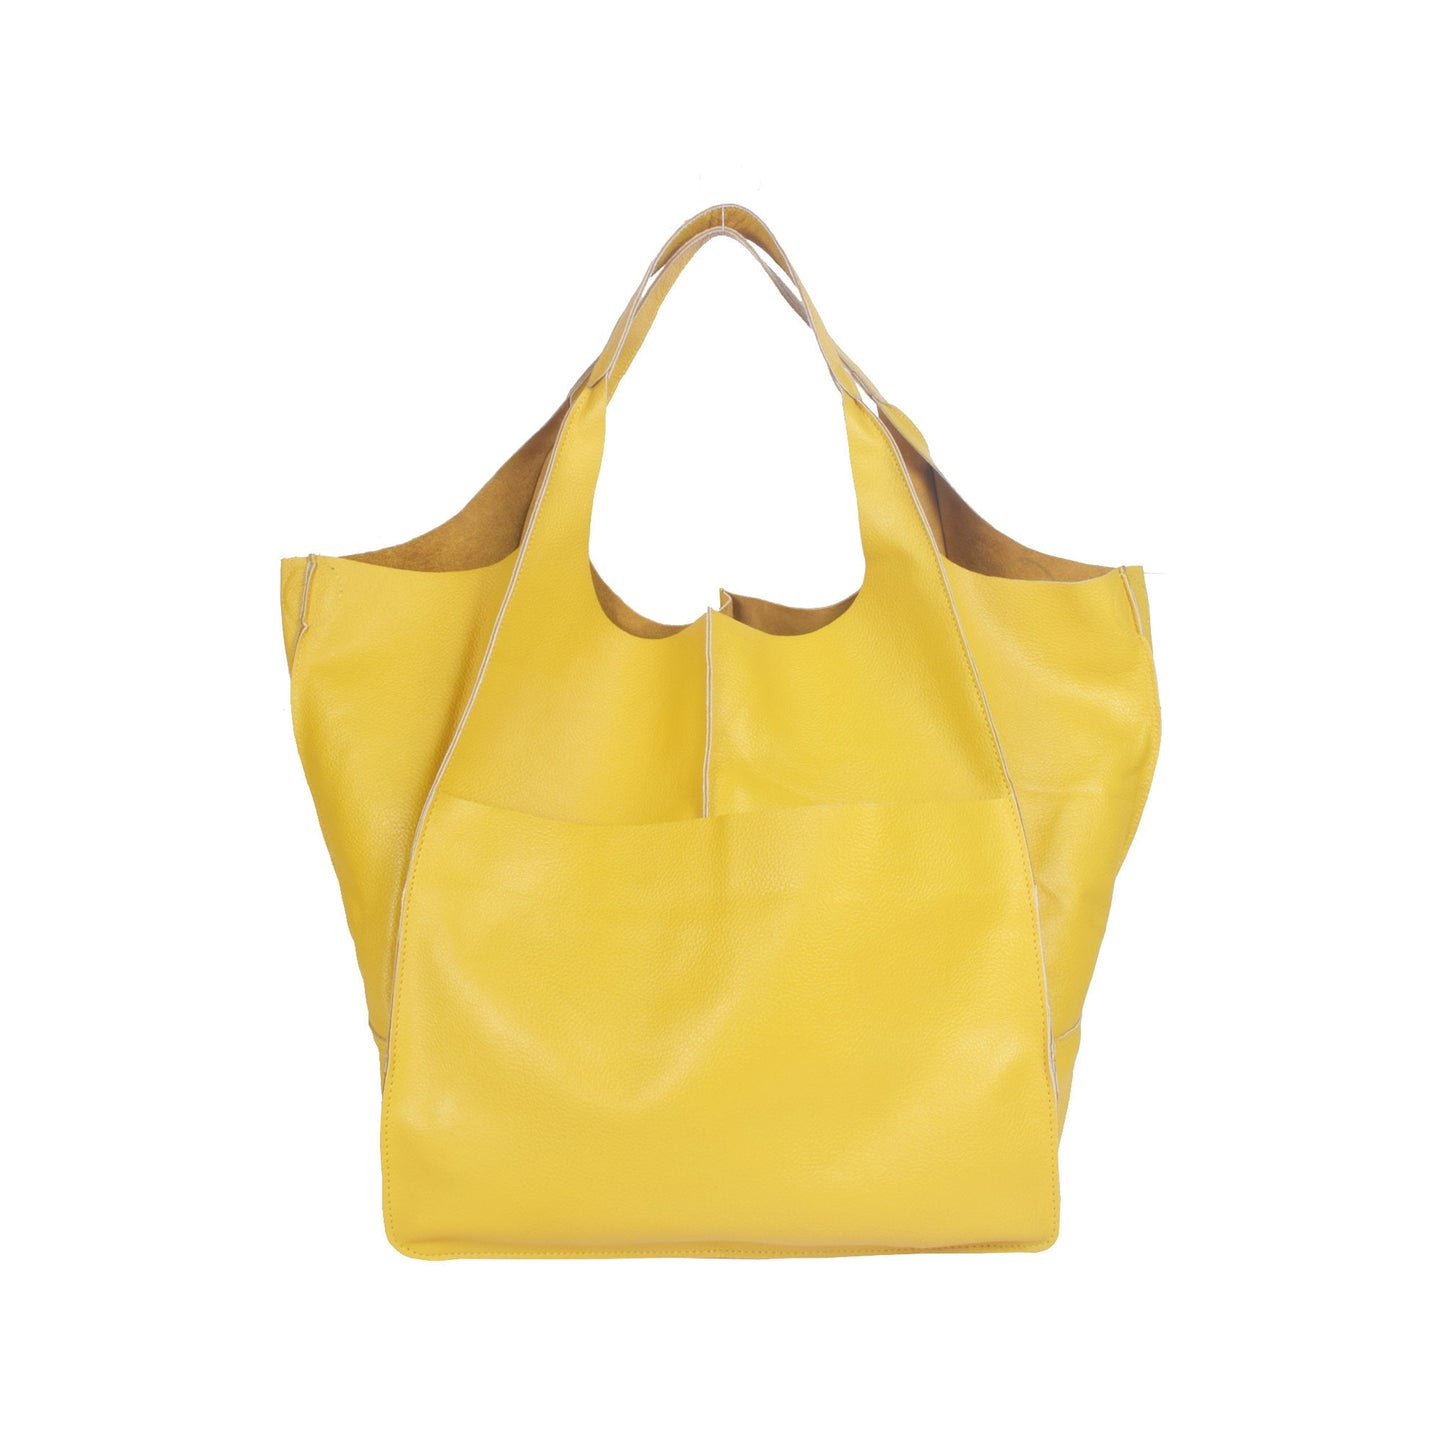 Yellow Oversize Leather Tote Shopper Bag Large Weekender Shoulder Bag Large Travel Bag Leather Shopping Bag Oversized Tote Everyday Purse